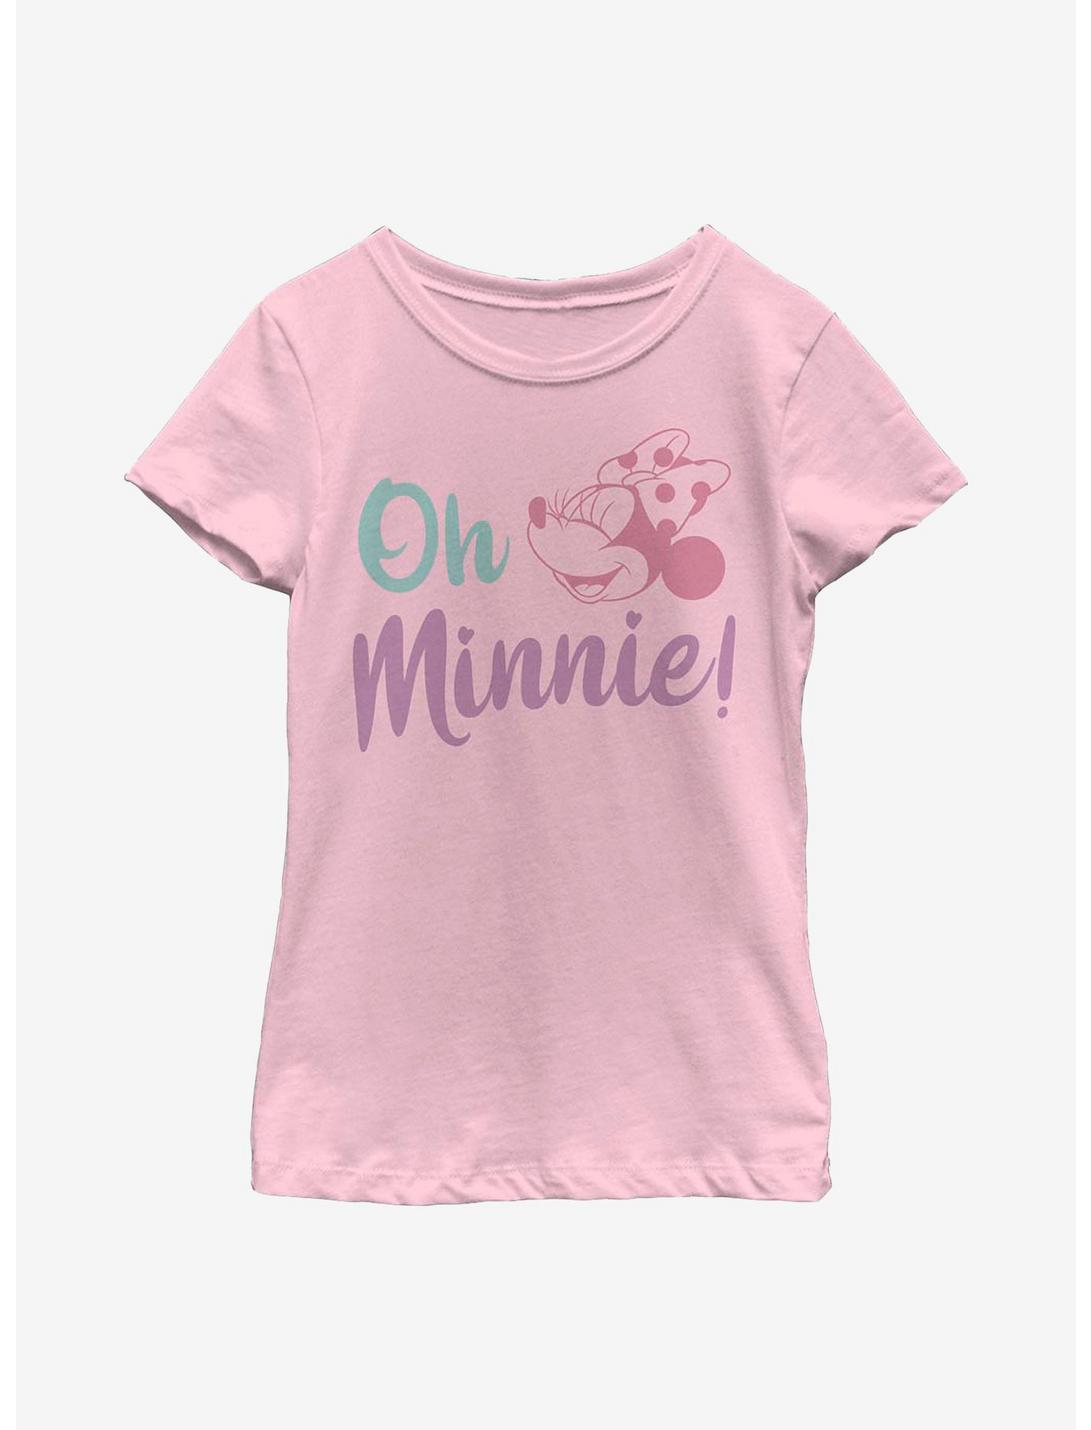 Disney Minnie Mouse Oh Minnie Youth Girls T-Shirt, PINK, hi-res